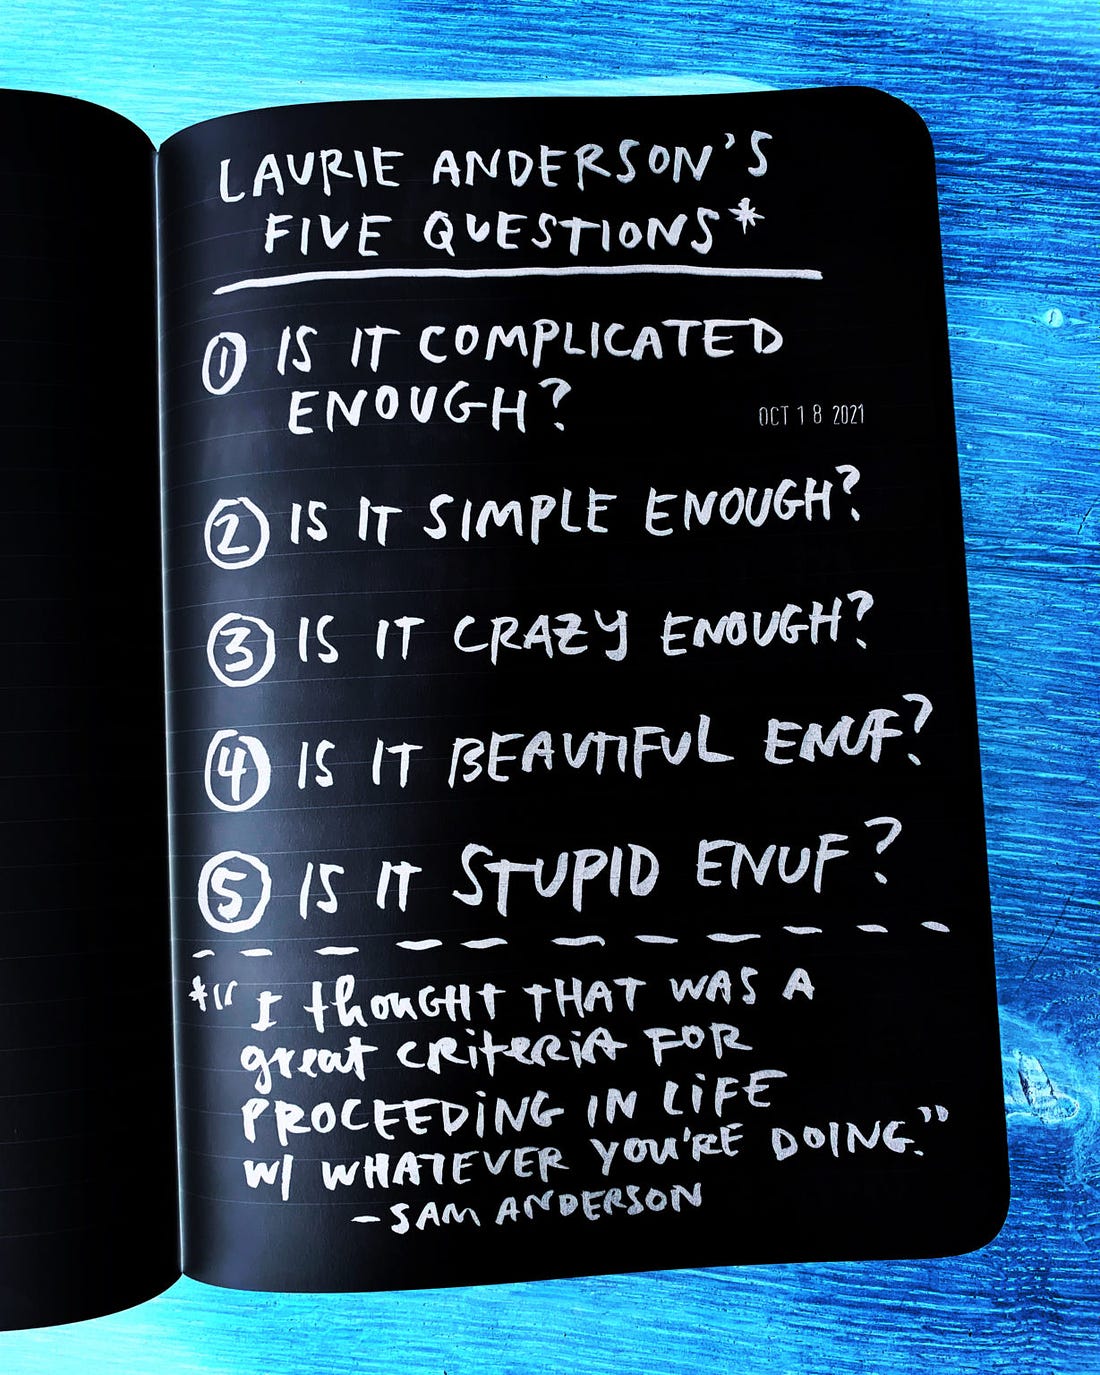 a list of Laurie Anderson’s five questions